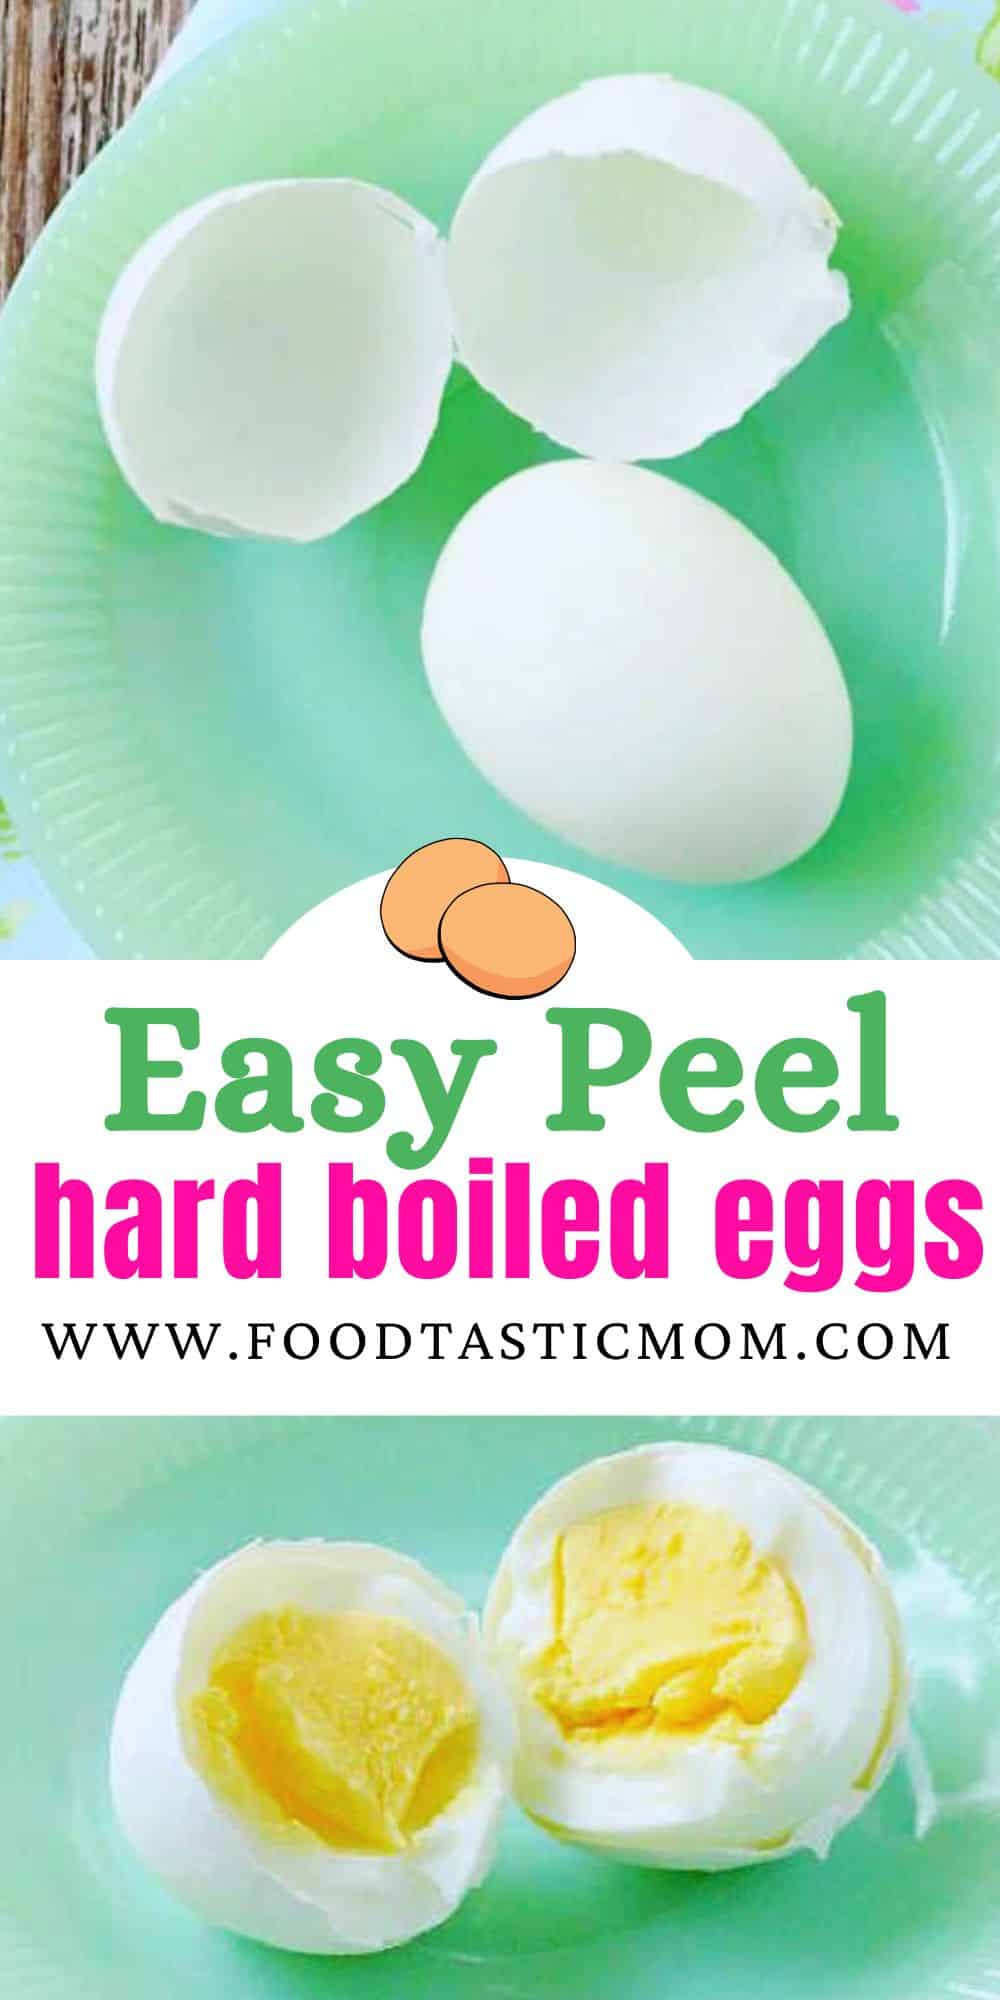 This method yields easy peel hard boiled eggs every time - guaranteed! via @foodtasticmom